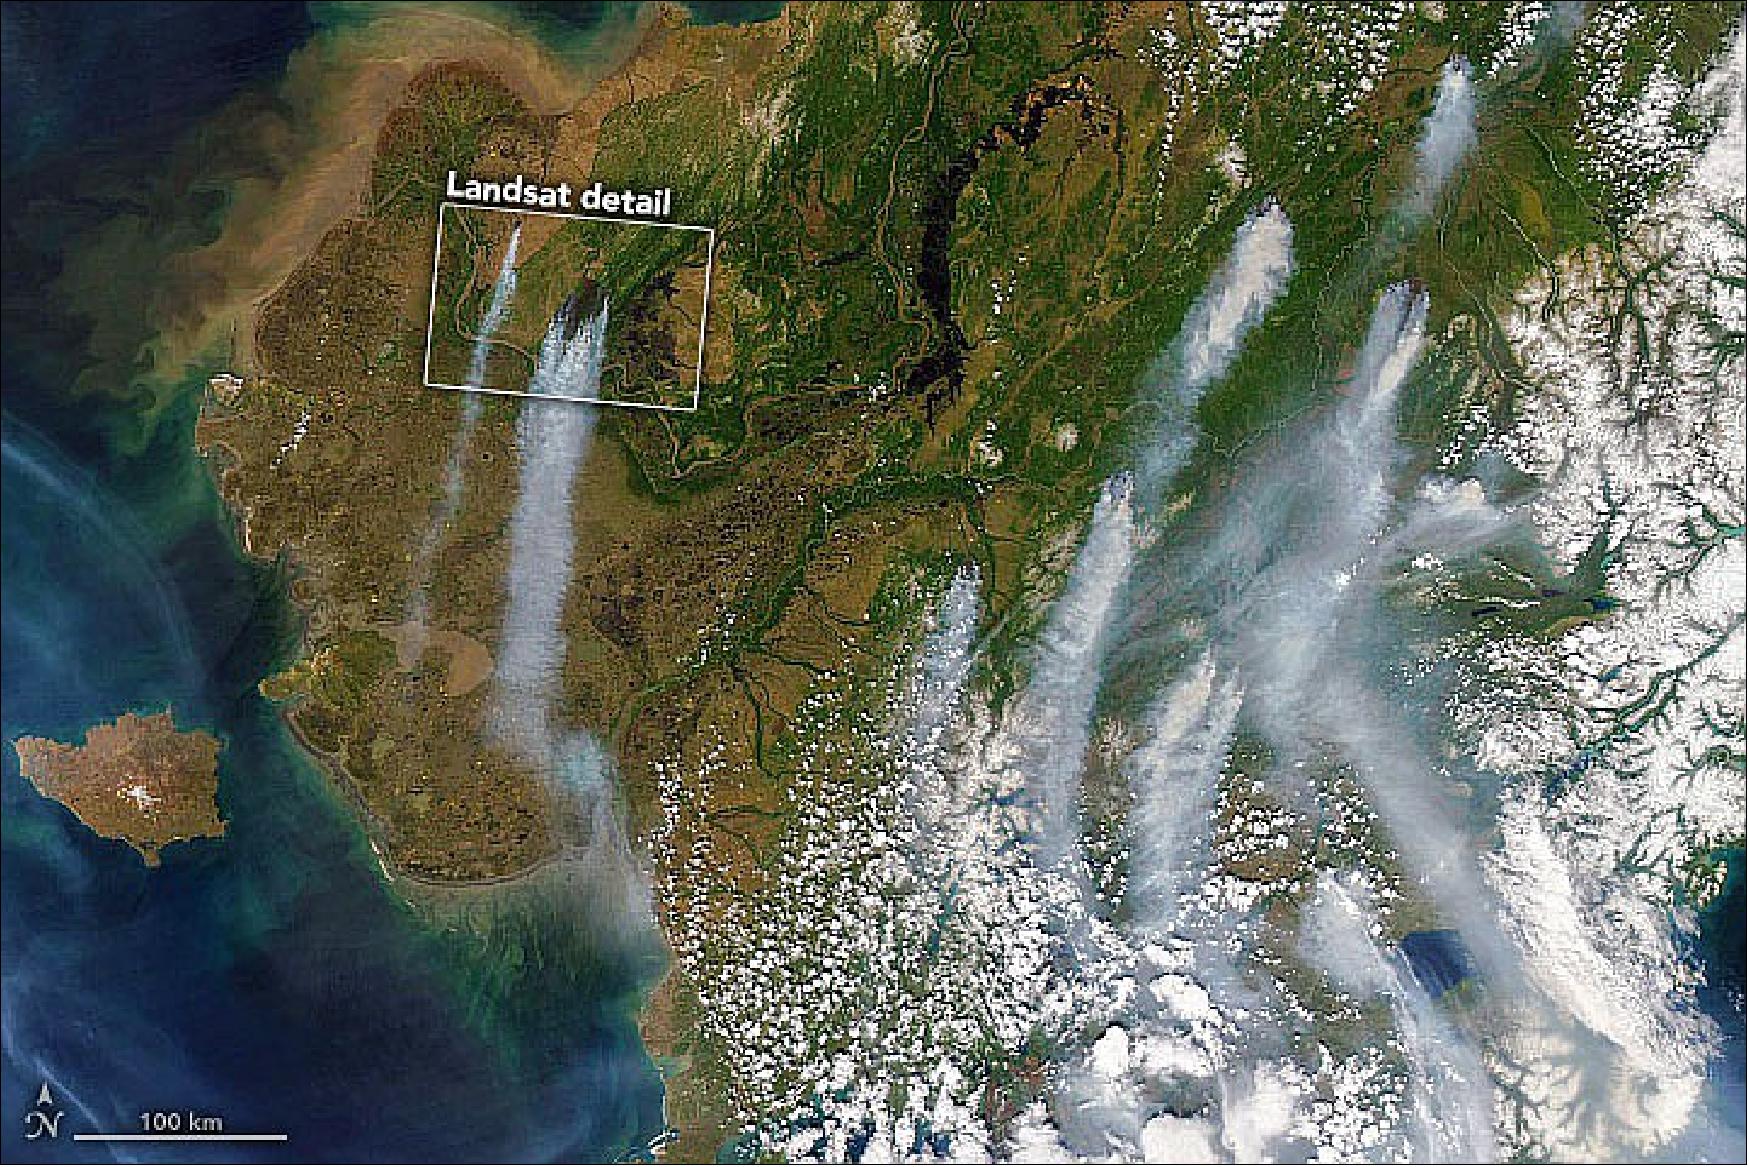 Figure 8: As of June 14, 2022, there were 85 active fires burning across the state. More than half of them were burning in southwest Alaska, which is shown in a natural-color image acquired on June 10, 2022, by the Moderate Resolution Imaging Spectroradiometer (MODIS) on NASA’s Aqua satellite (image credit: NASA Earth Observatory images by Joshua Stevens, using Landsat data from the U.S. Geological Survey and MODIS data from NASA EOSDIS LANCE and GIBS/Worldview. Story by Sara E. Pratt)